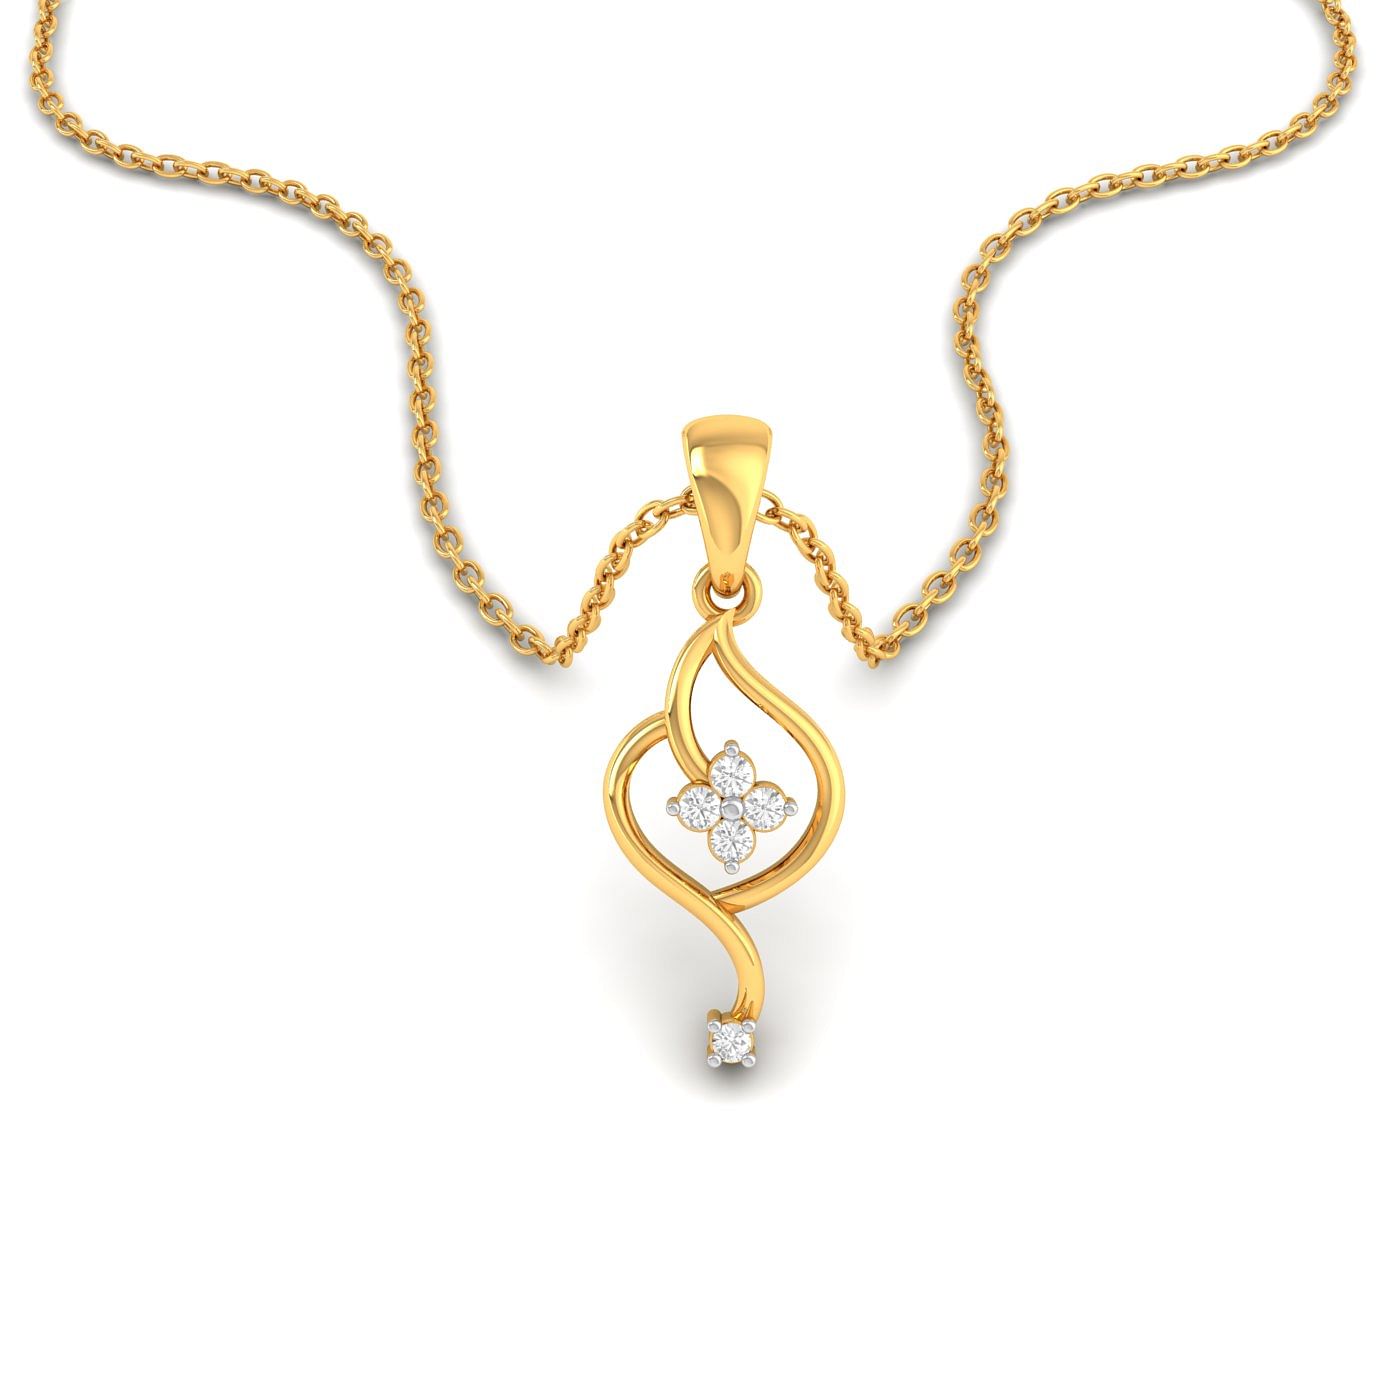 Yellow gold Five Stone Floral Pendant